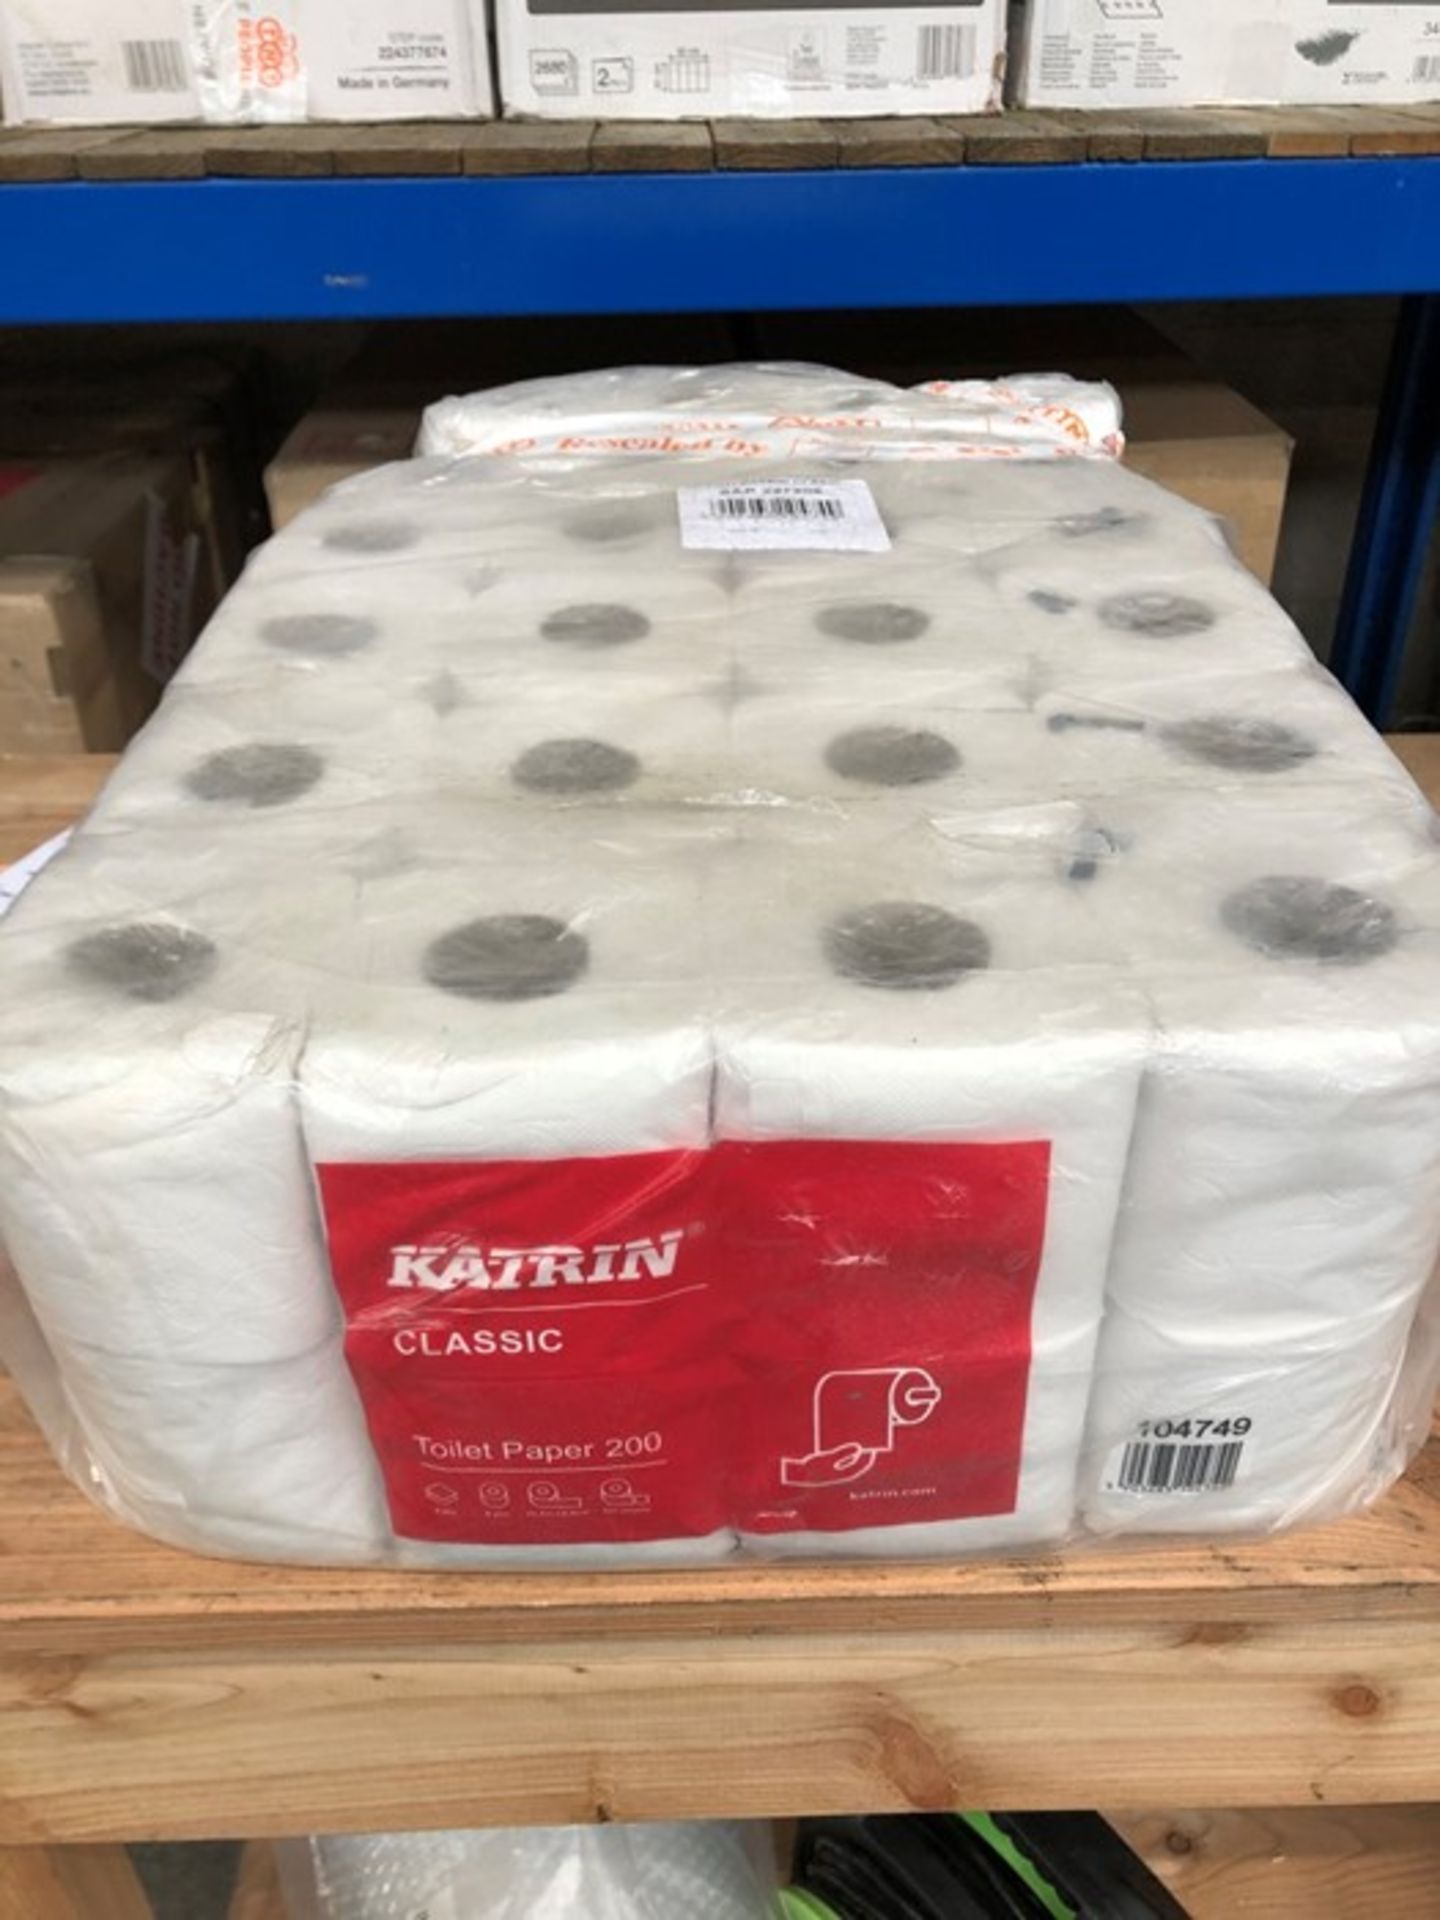 1 BOX CONTAINING 48 ROLLS OF KATRIN TOILET PAPER